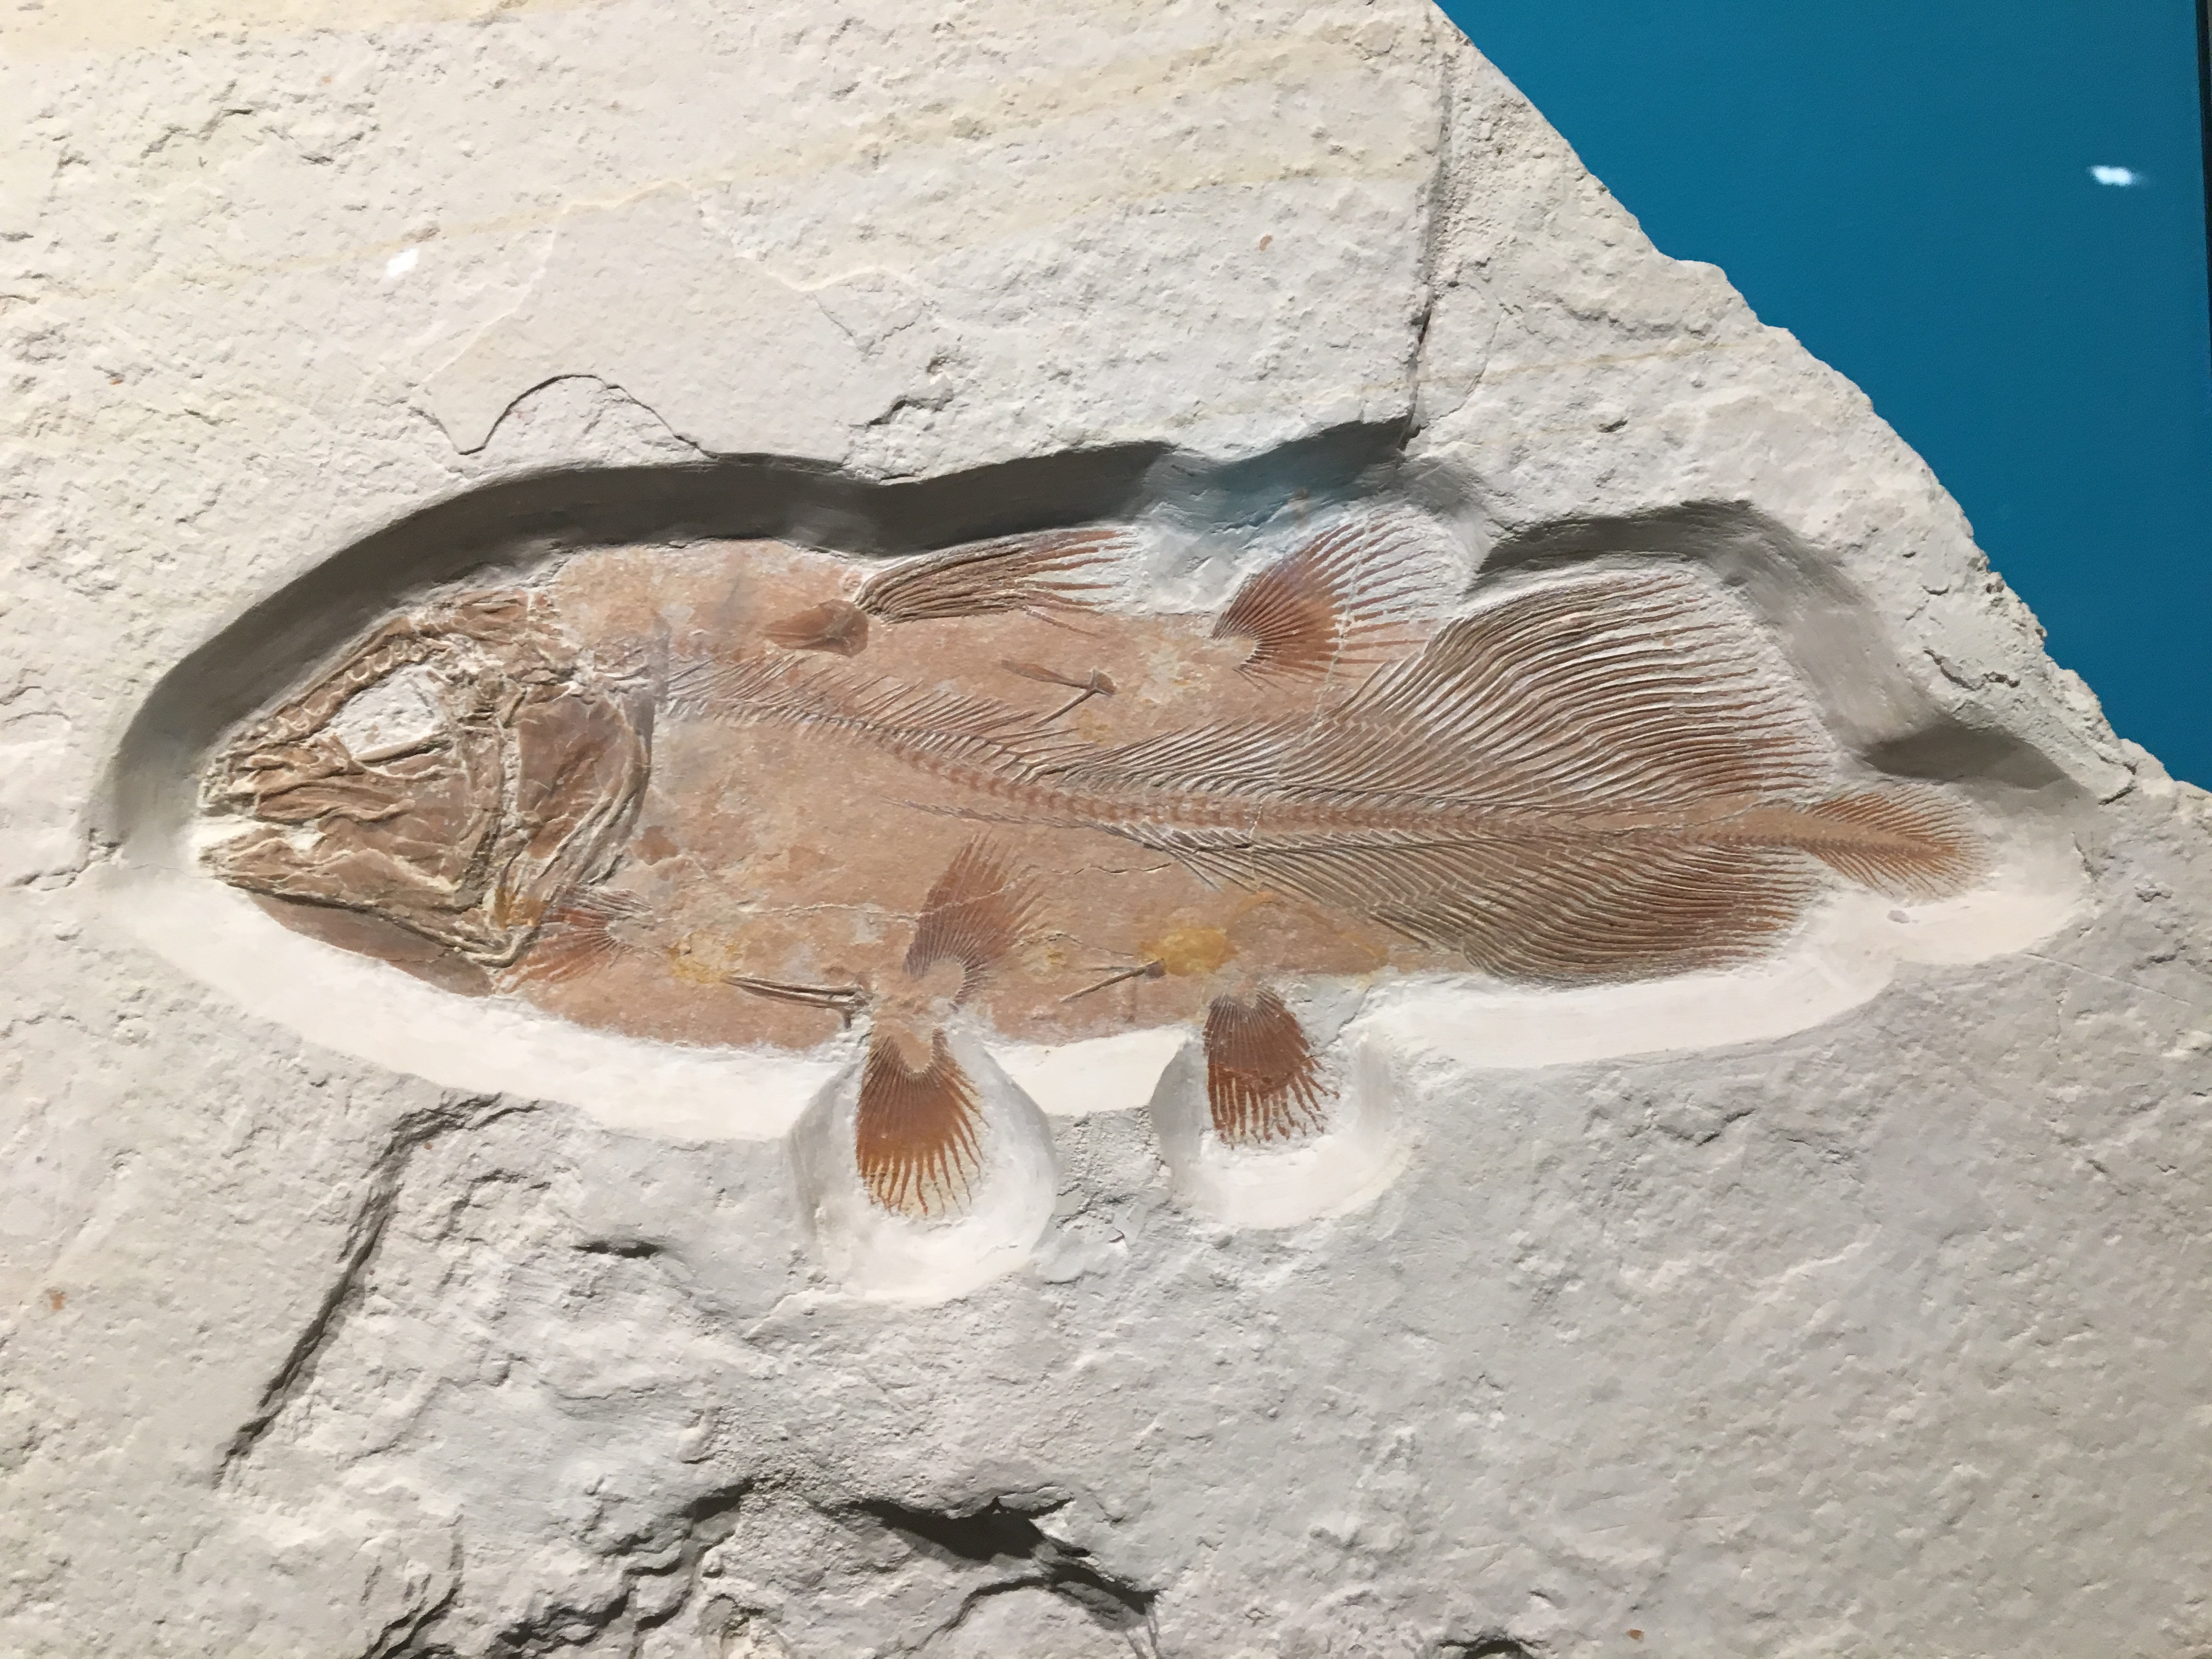 Great white-shark-sized ancient fish discovered by accident from fossilized  lung